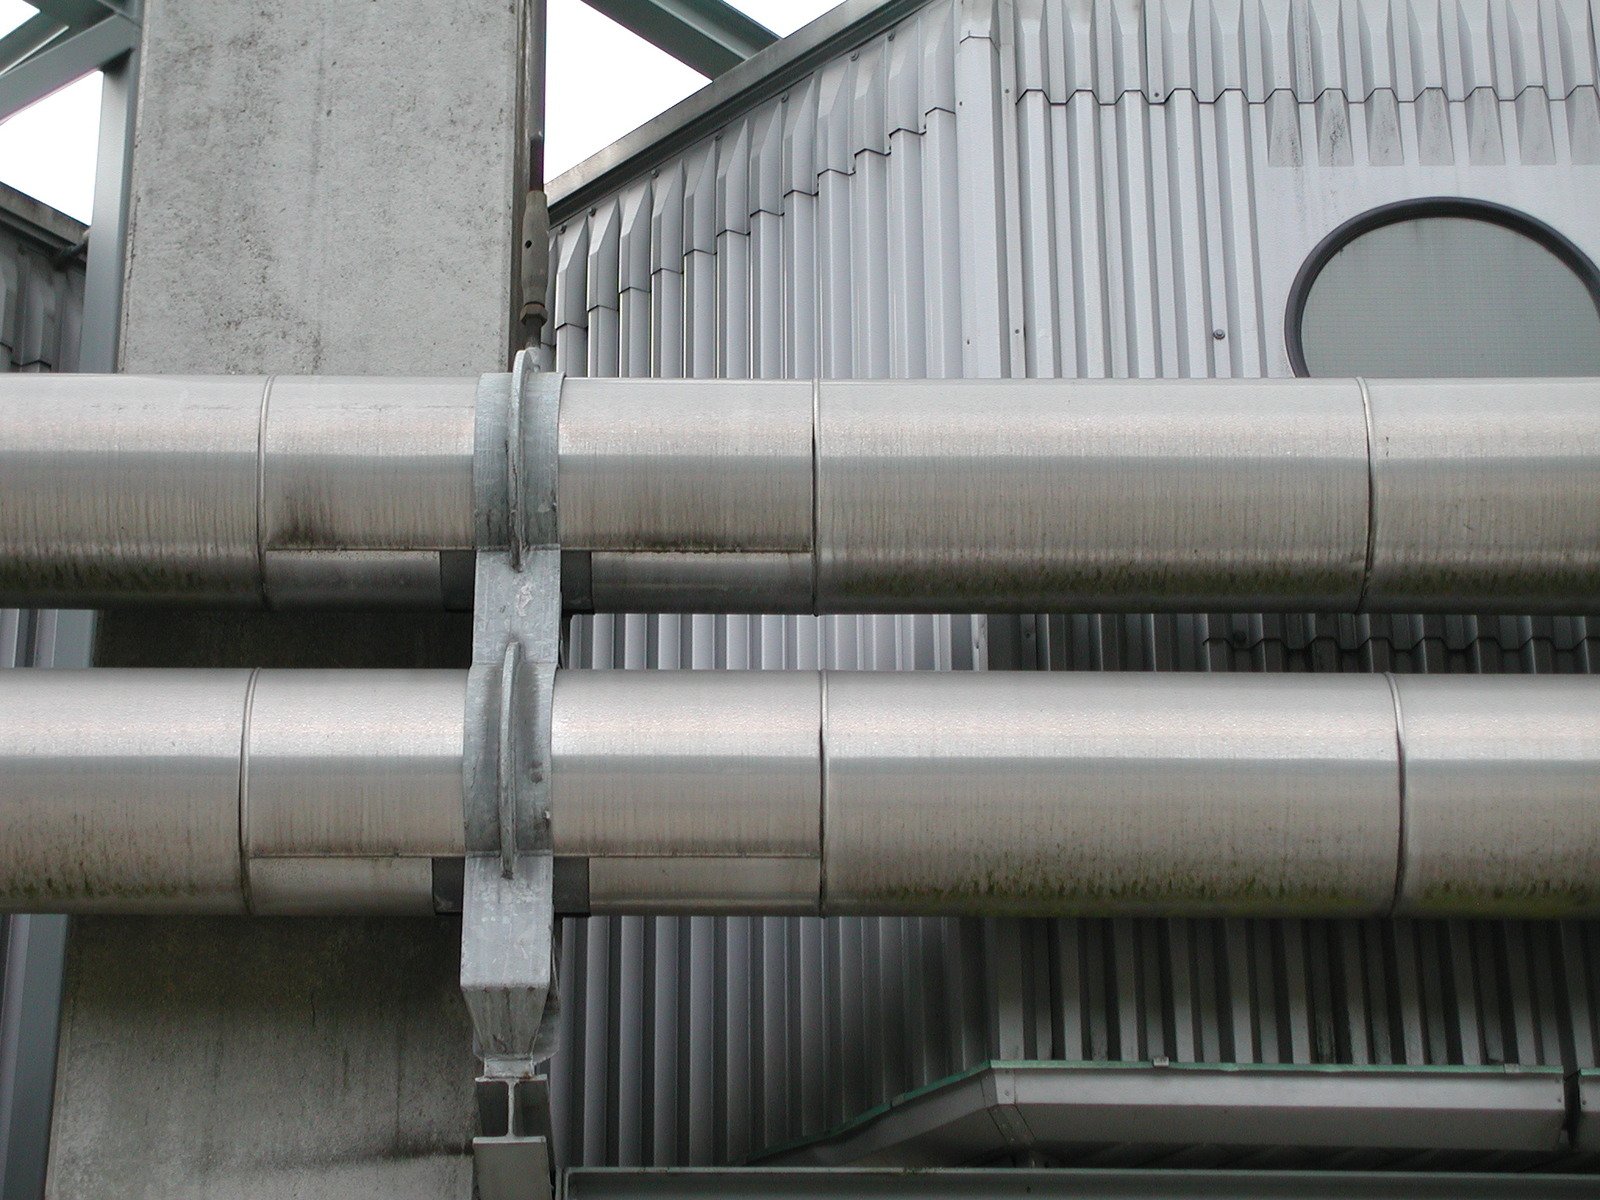 the back side of an industrial building shows metal pipes